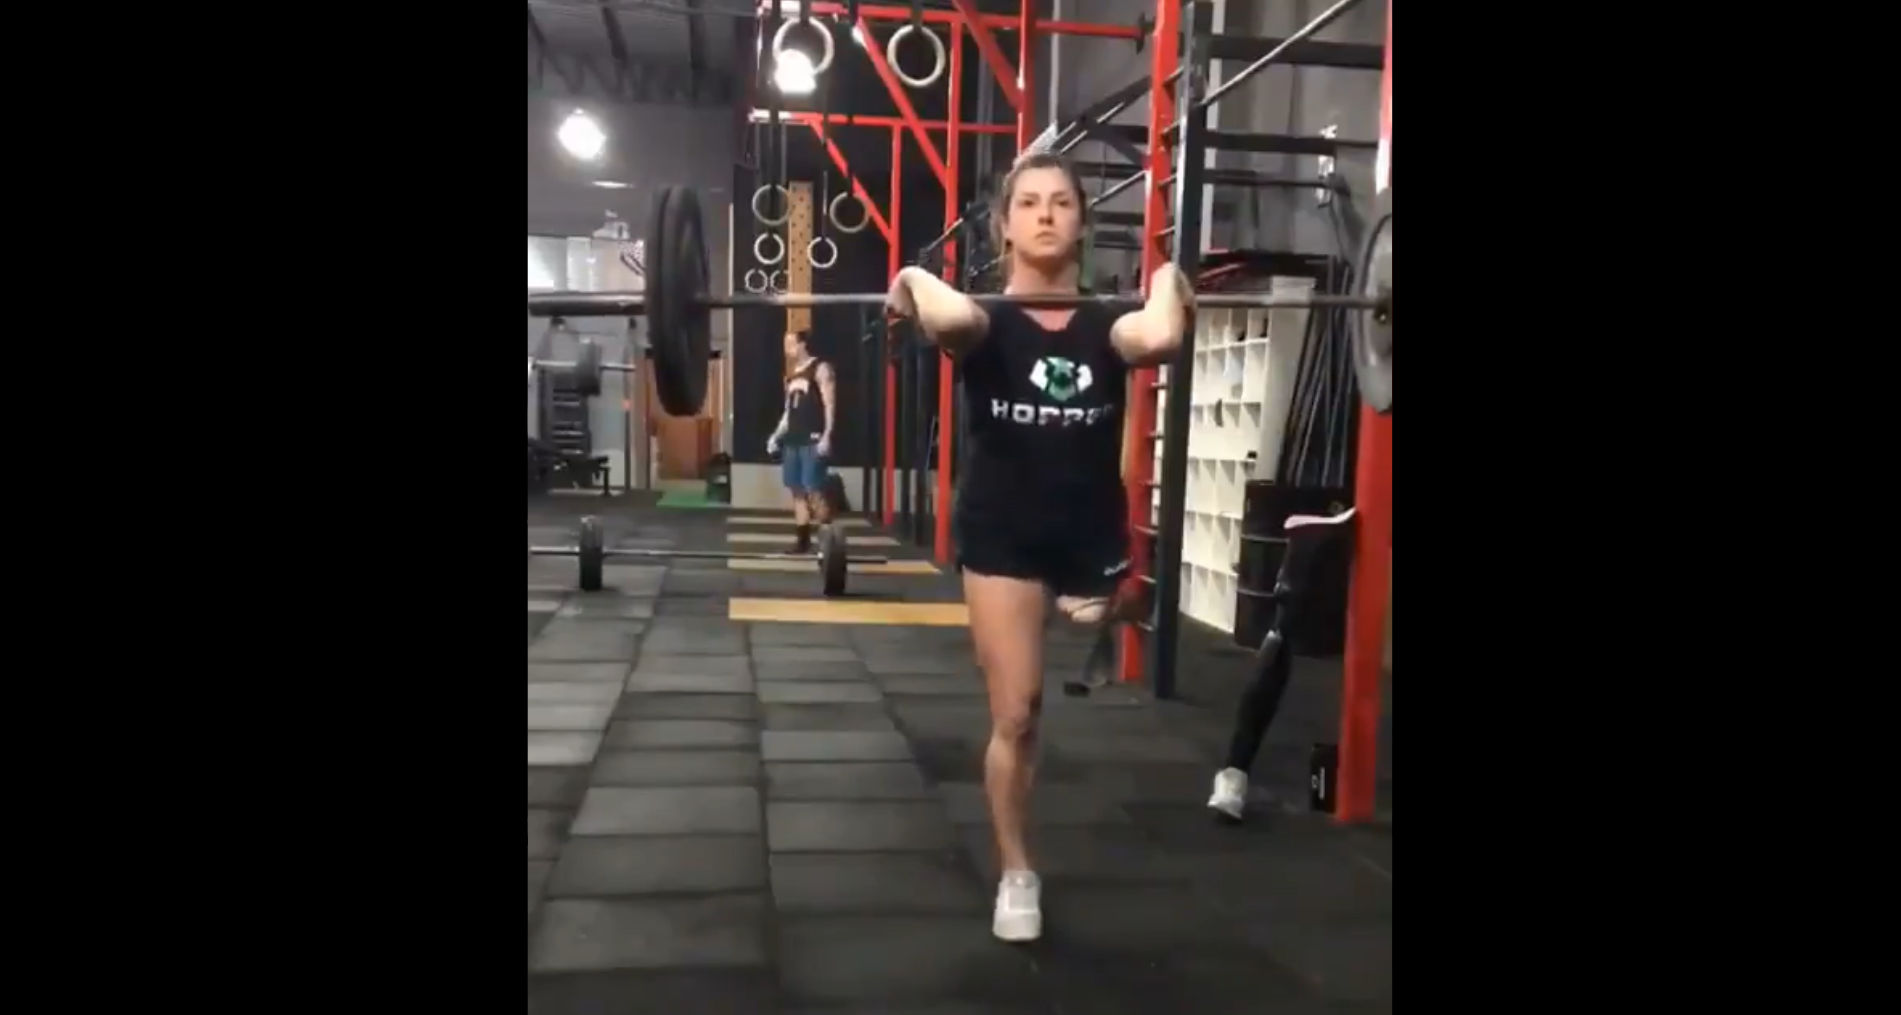 ‘Monday Motivation’: Video of disabled woman working out goes viral